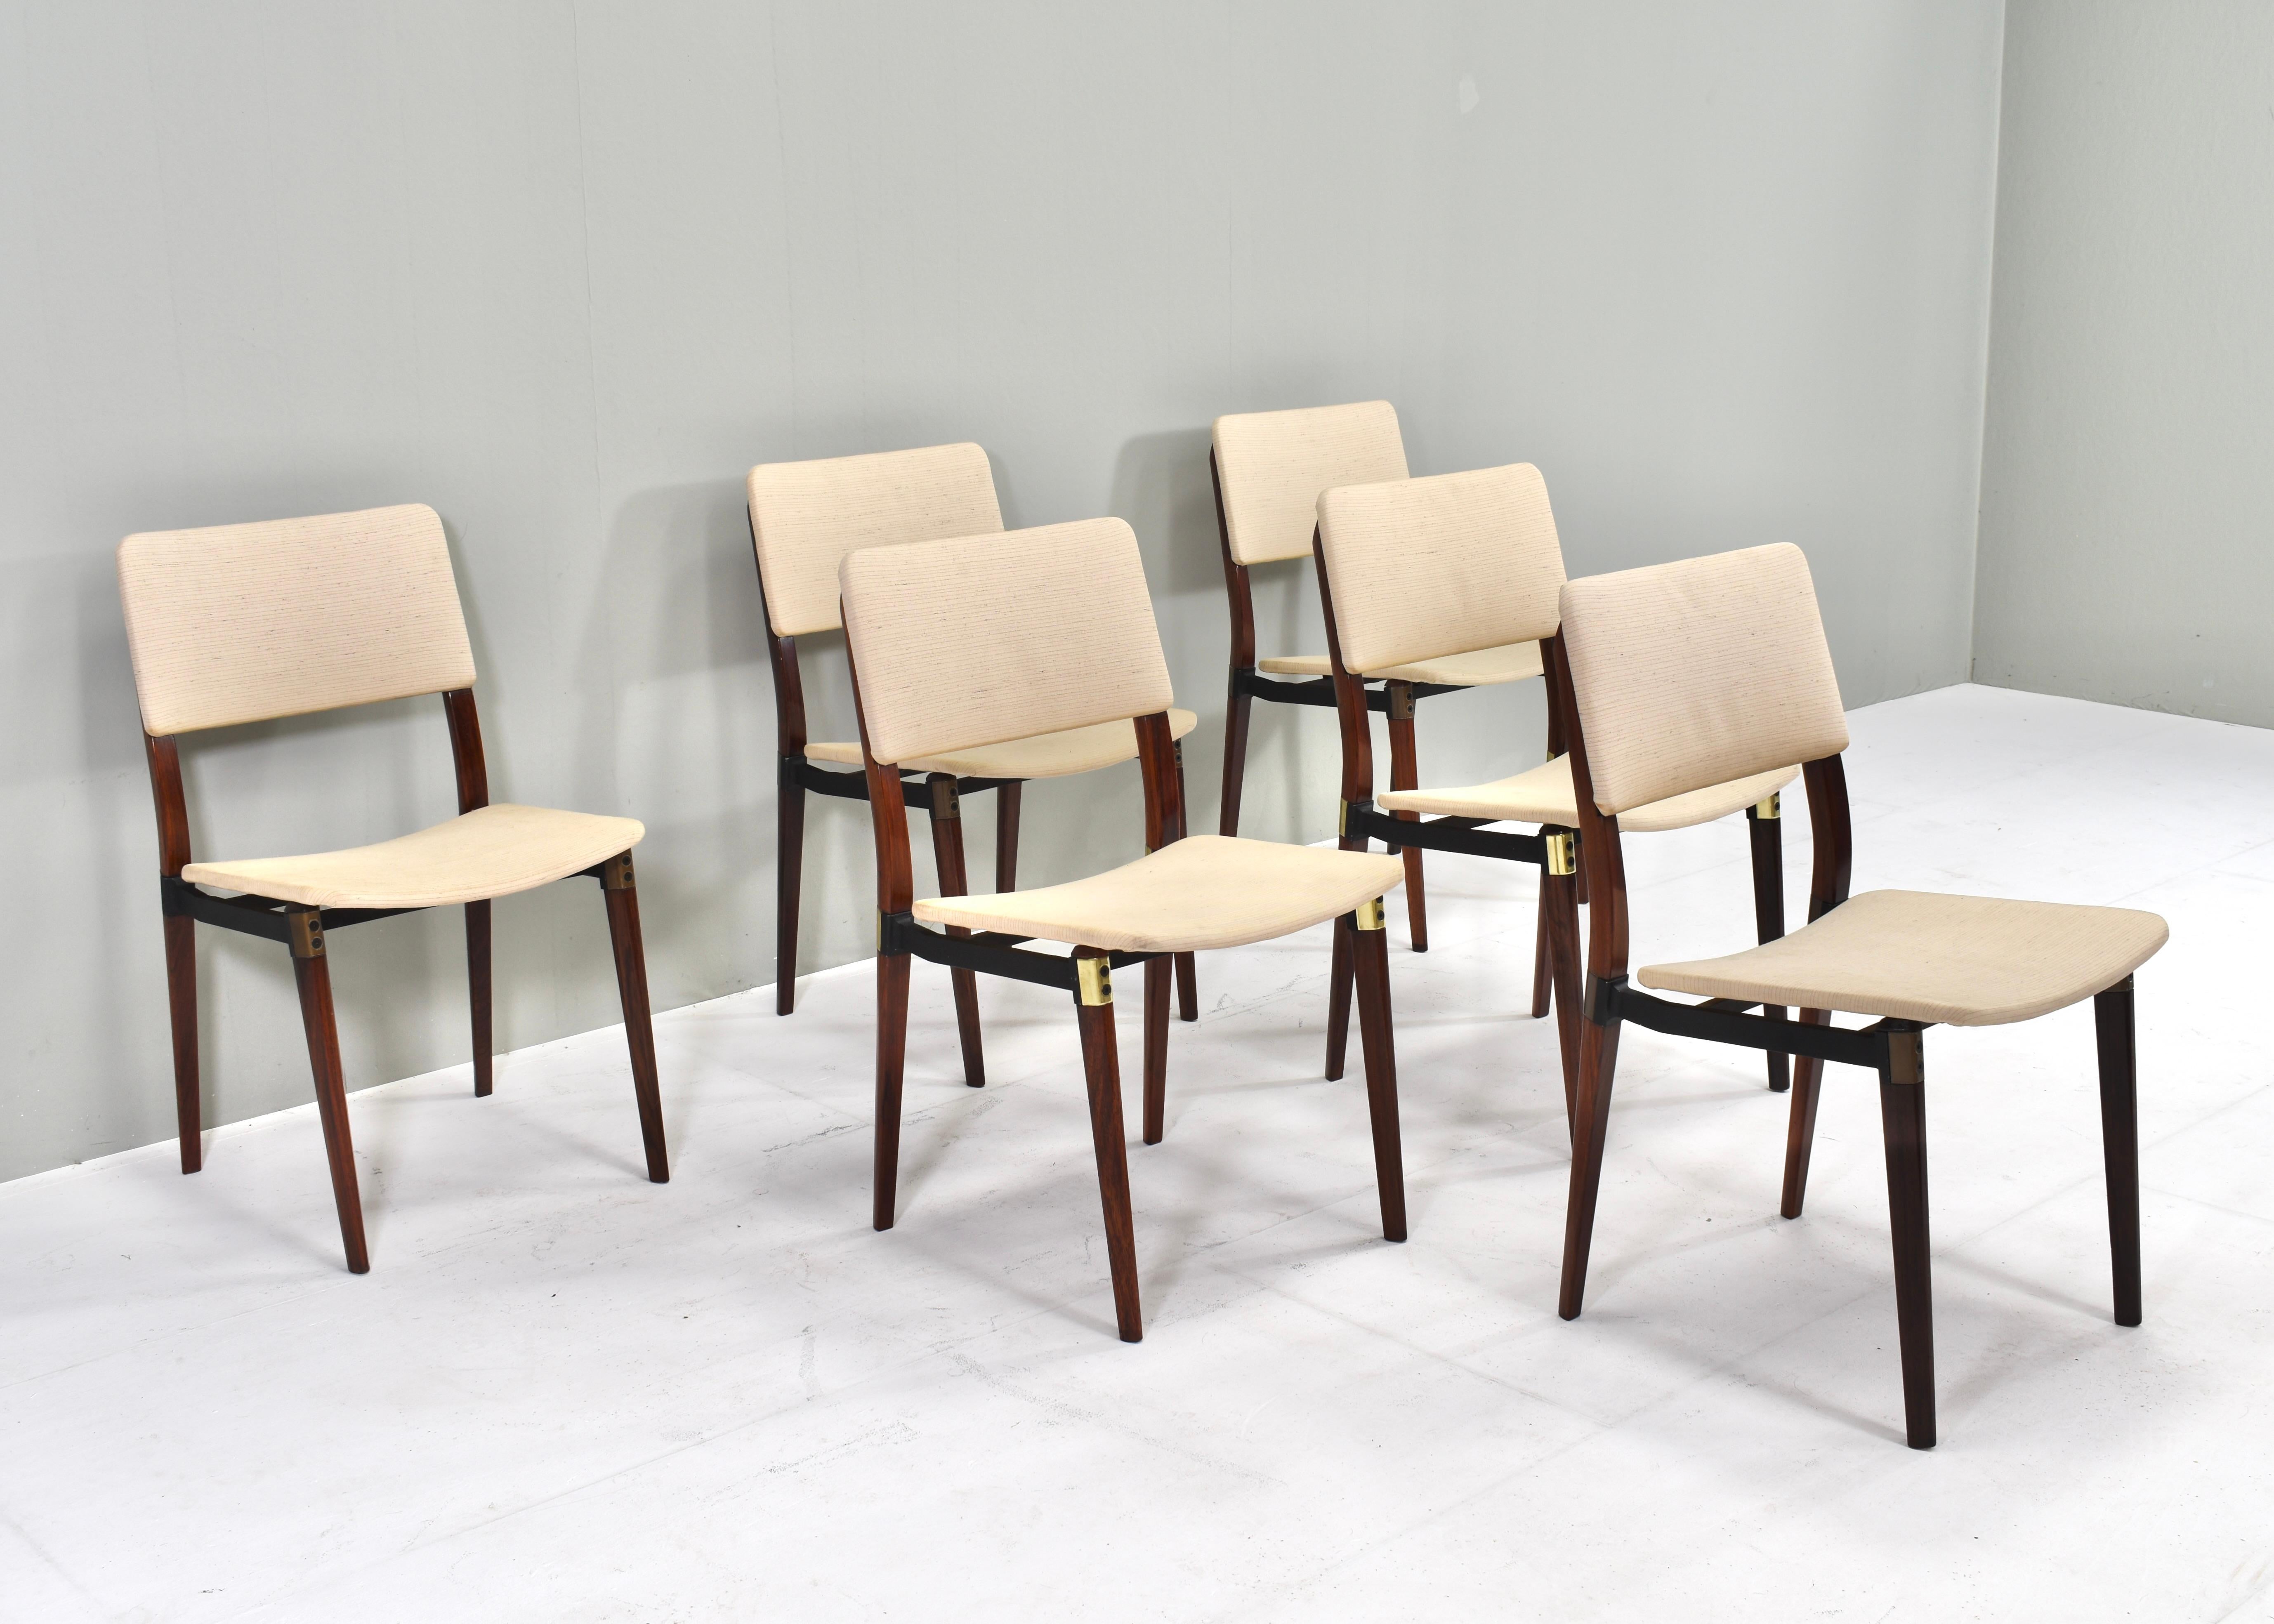 Set of six S82 dining chairs by Eugenio Gerli (and Osvaldo Borsani) for Tecno, Italy – circa 1960. 
The chairs still have their original upholstery and remain in good condition with normal signs of age and use. Two chairs have brass details (rare)